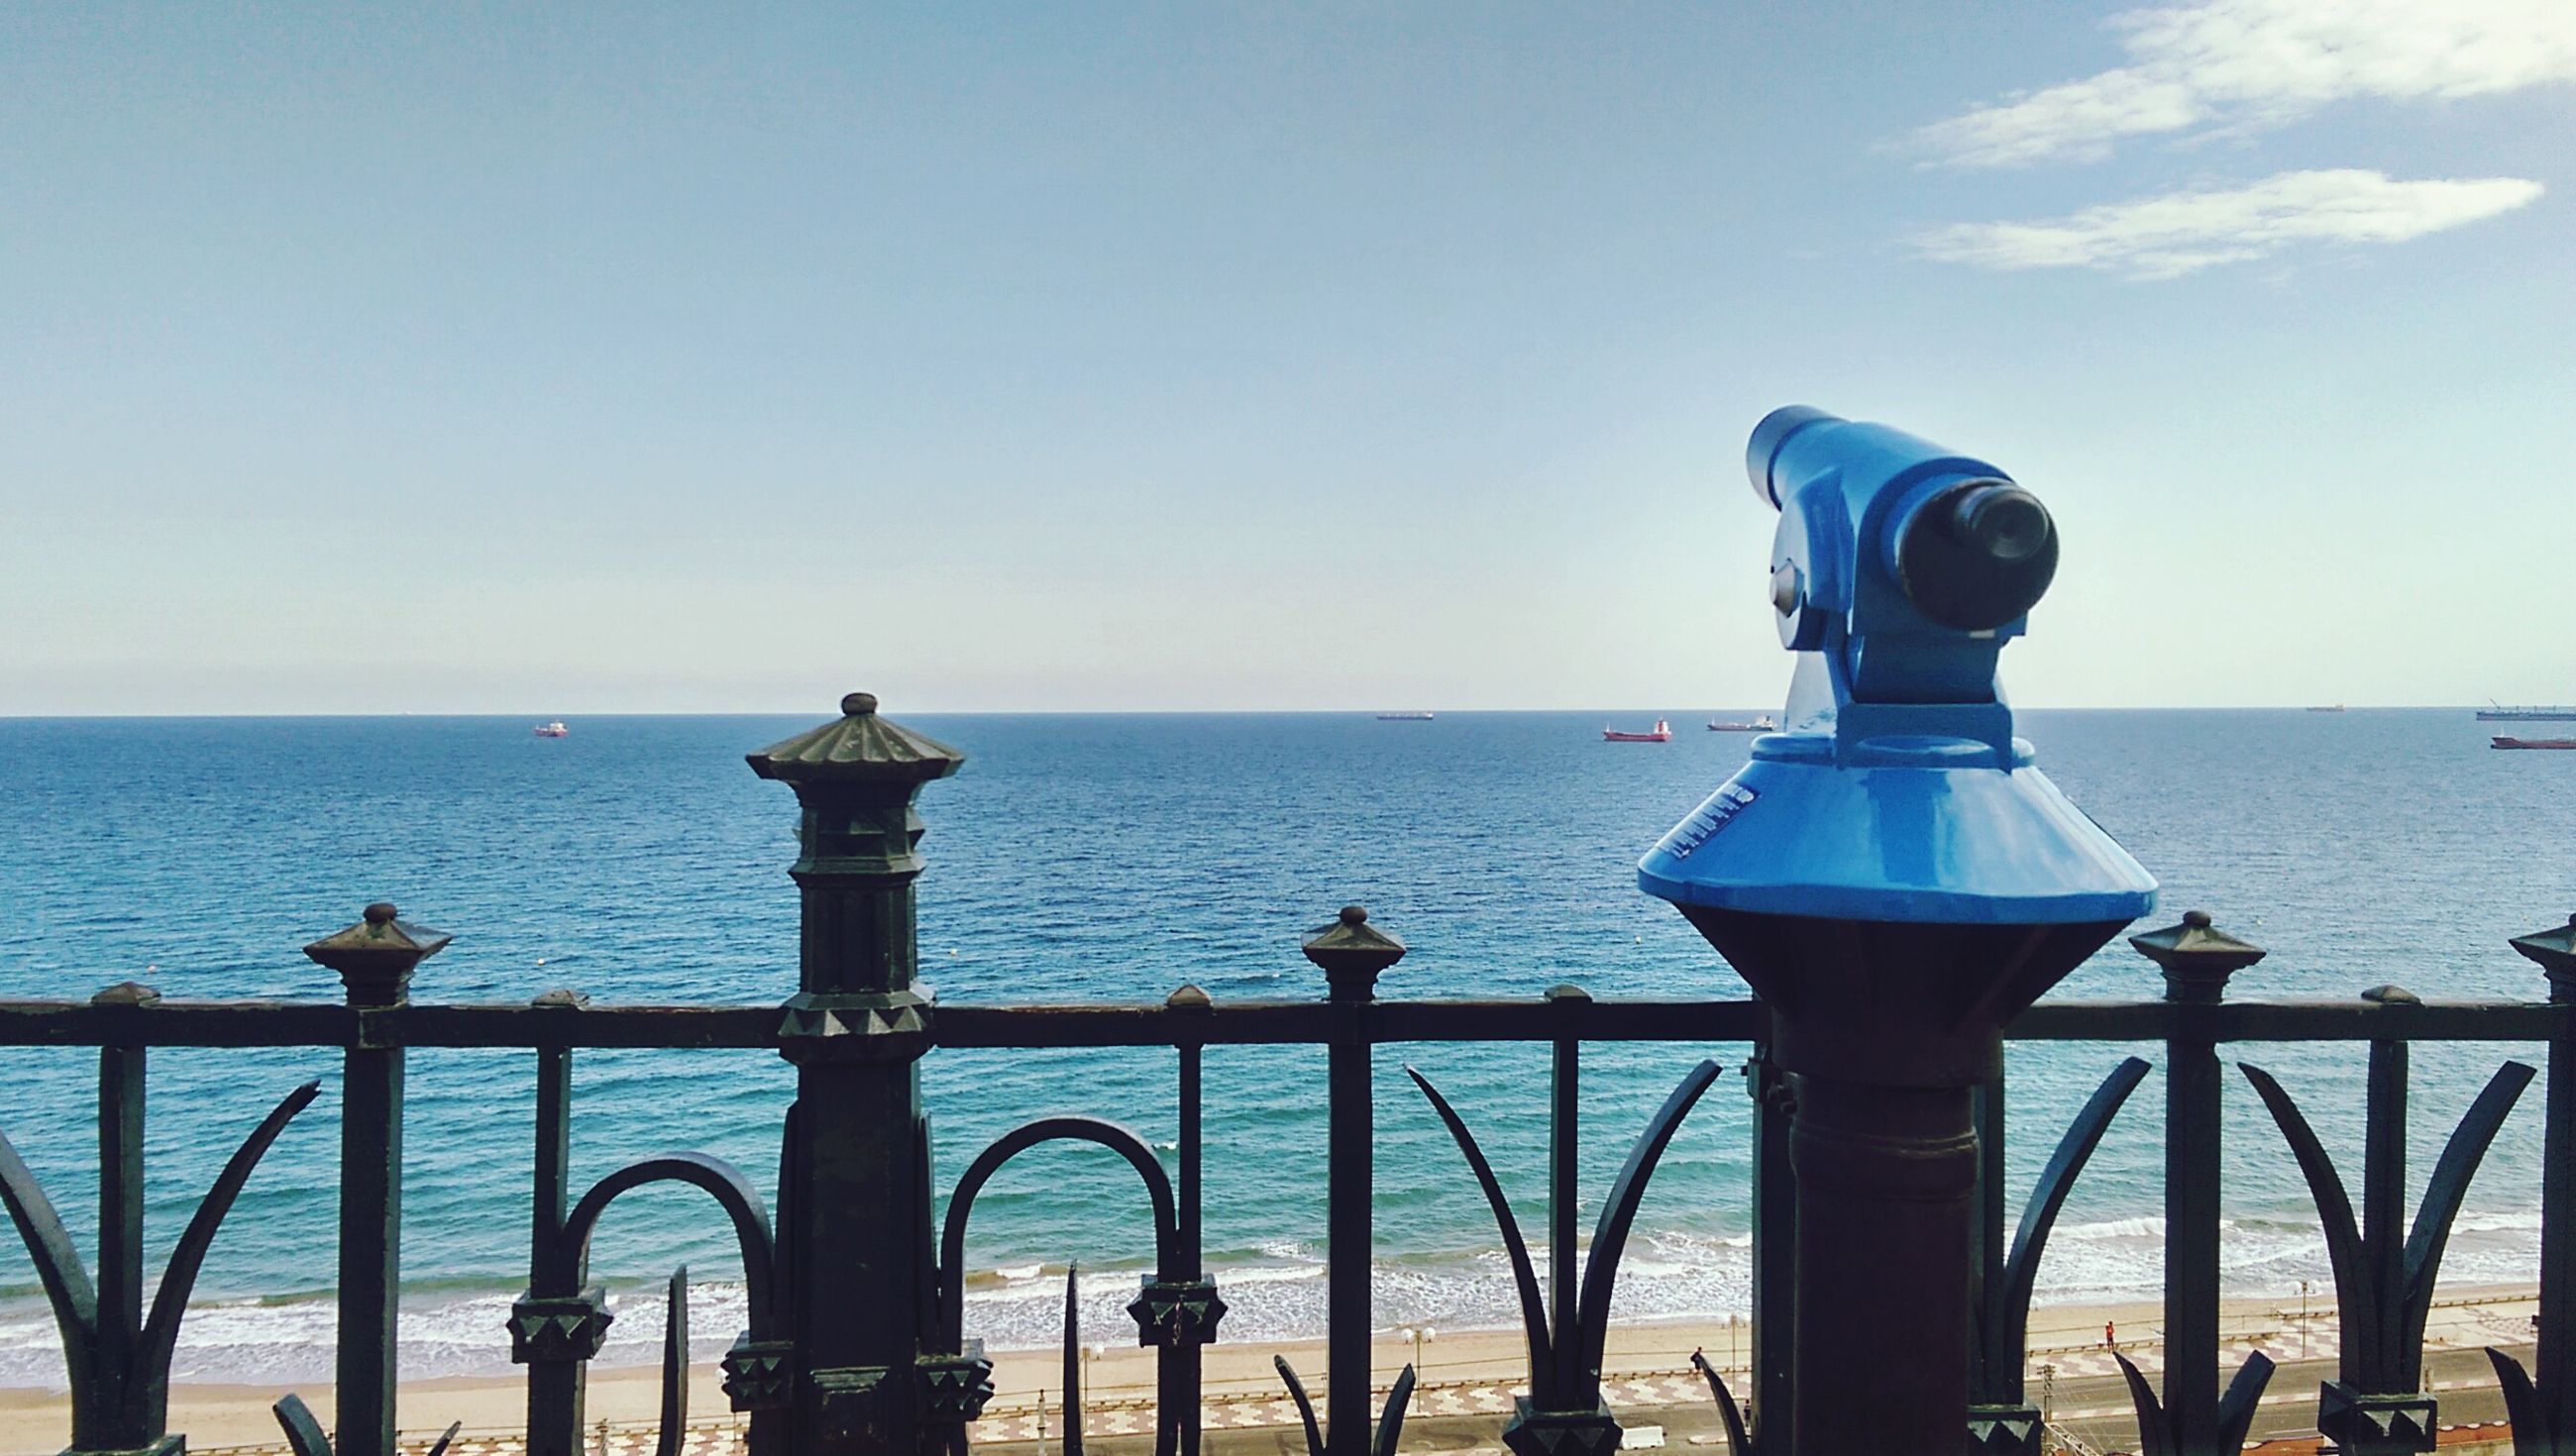 sea, railing, water, horizon over water, sky, coin-operated binoculars, scenics, hand-held telescope, tranquil scene, blue, tranquility, outdoors, metal, day, nature, no people, telescope, cloud - sky, beauty in nature, travel destinations, close-up